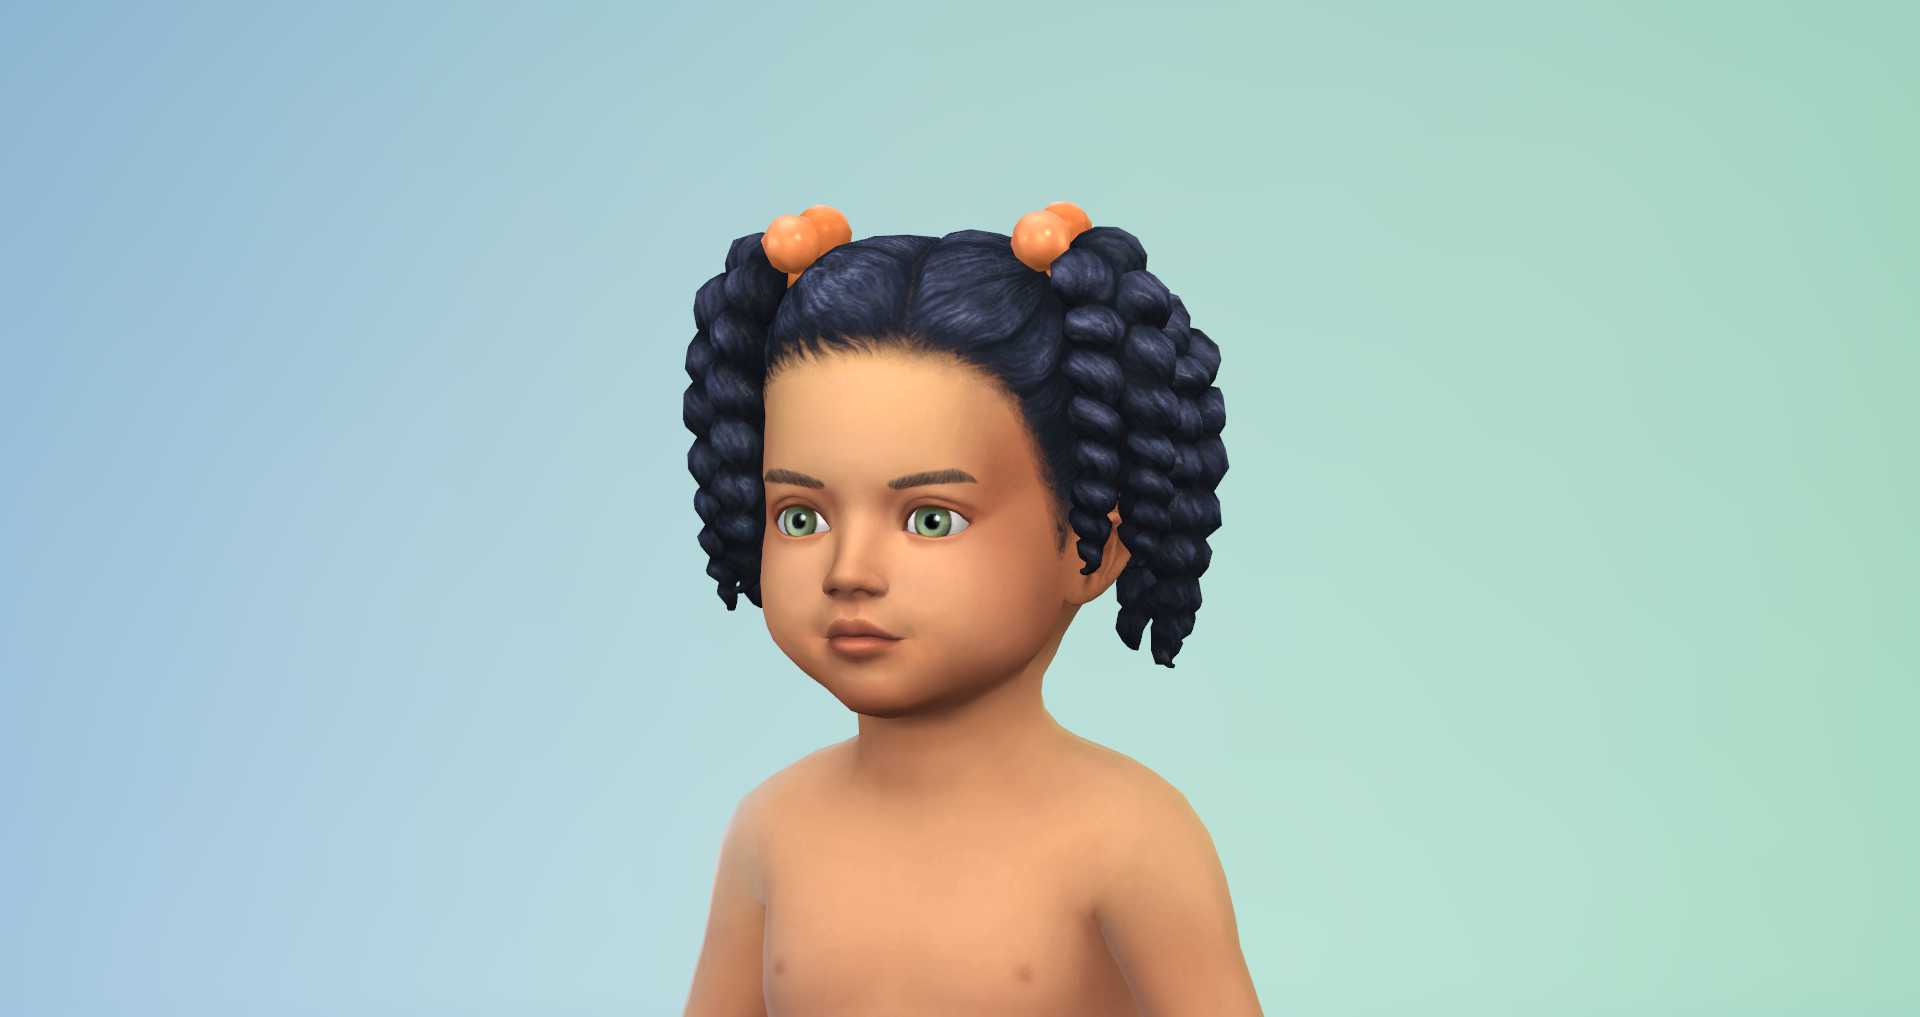 The Sims 4 Toddler Stuff: Build Items Overview